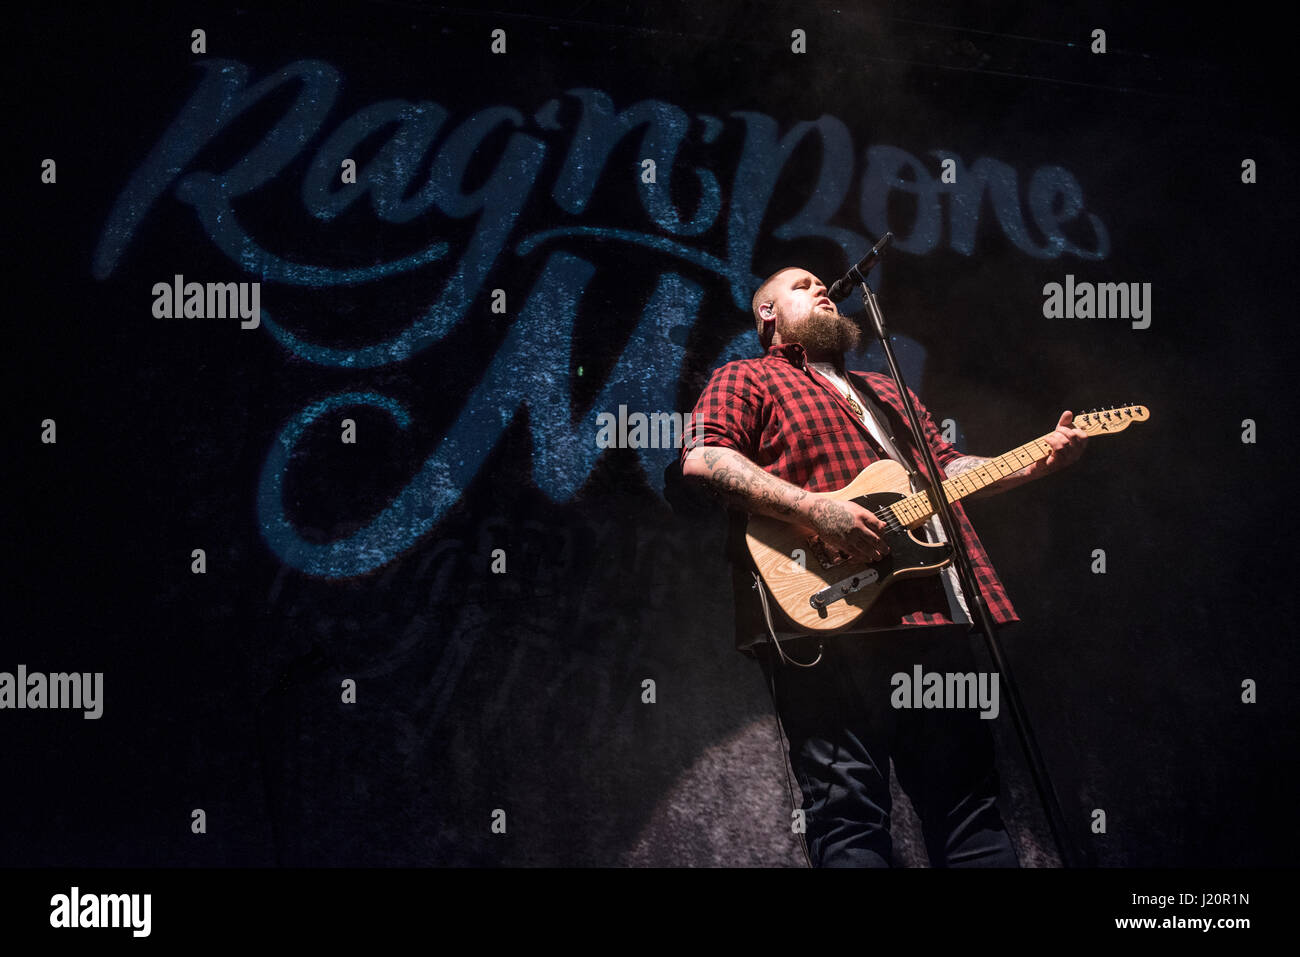 Manchester UK. 22nd April 2017. Rag N Bone Man performs at The Manchester Academy, Manchester UK on his headline sold out UK tour 2017, Manchester 22. Stock Photo